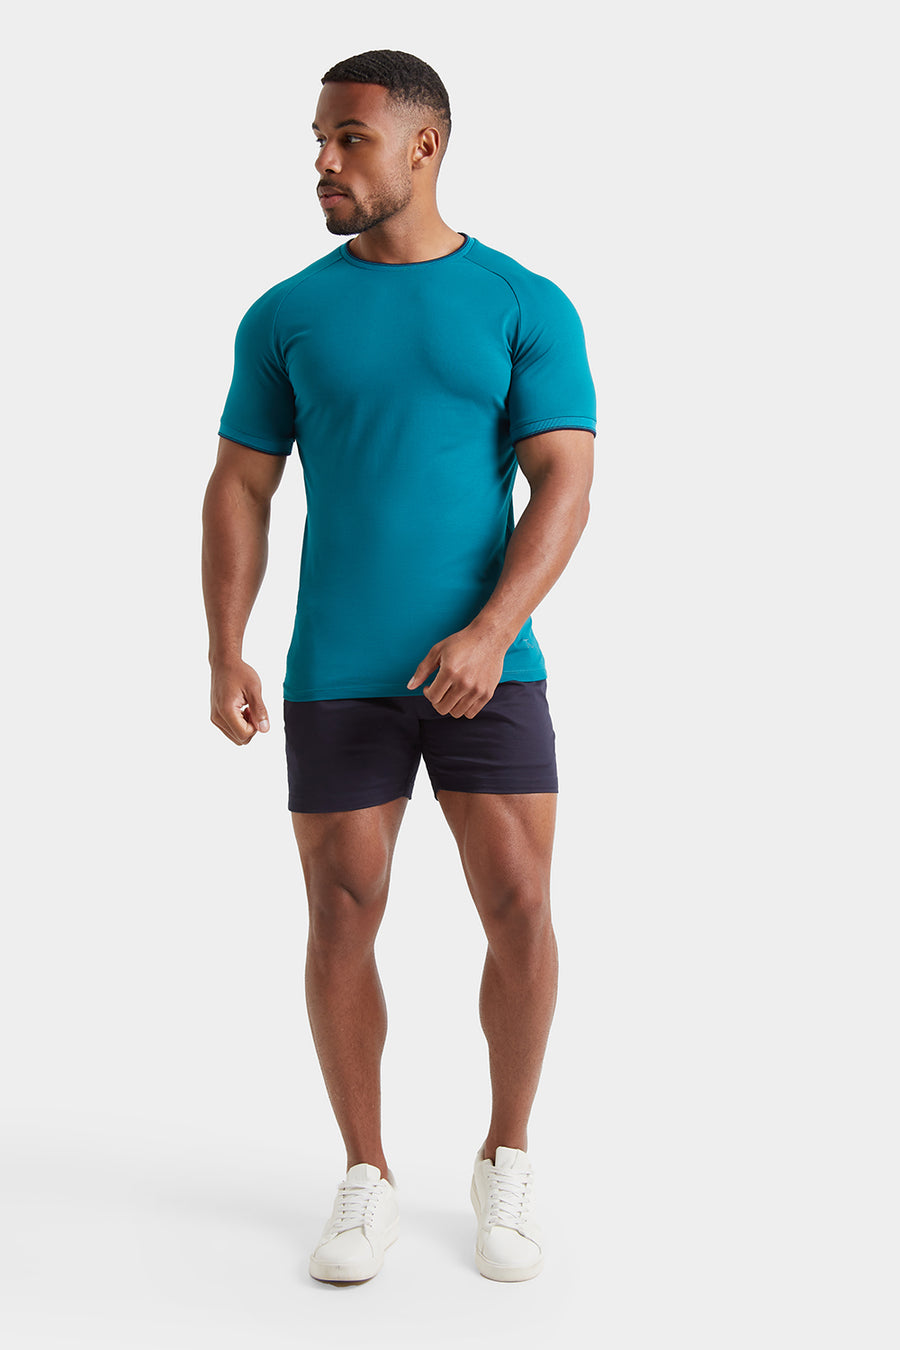 Tipped T-shirt in Peacock - TAILORED ATHLETE - USA